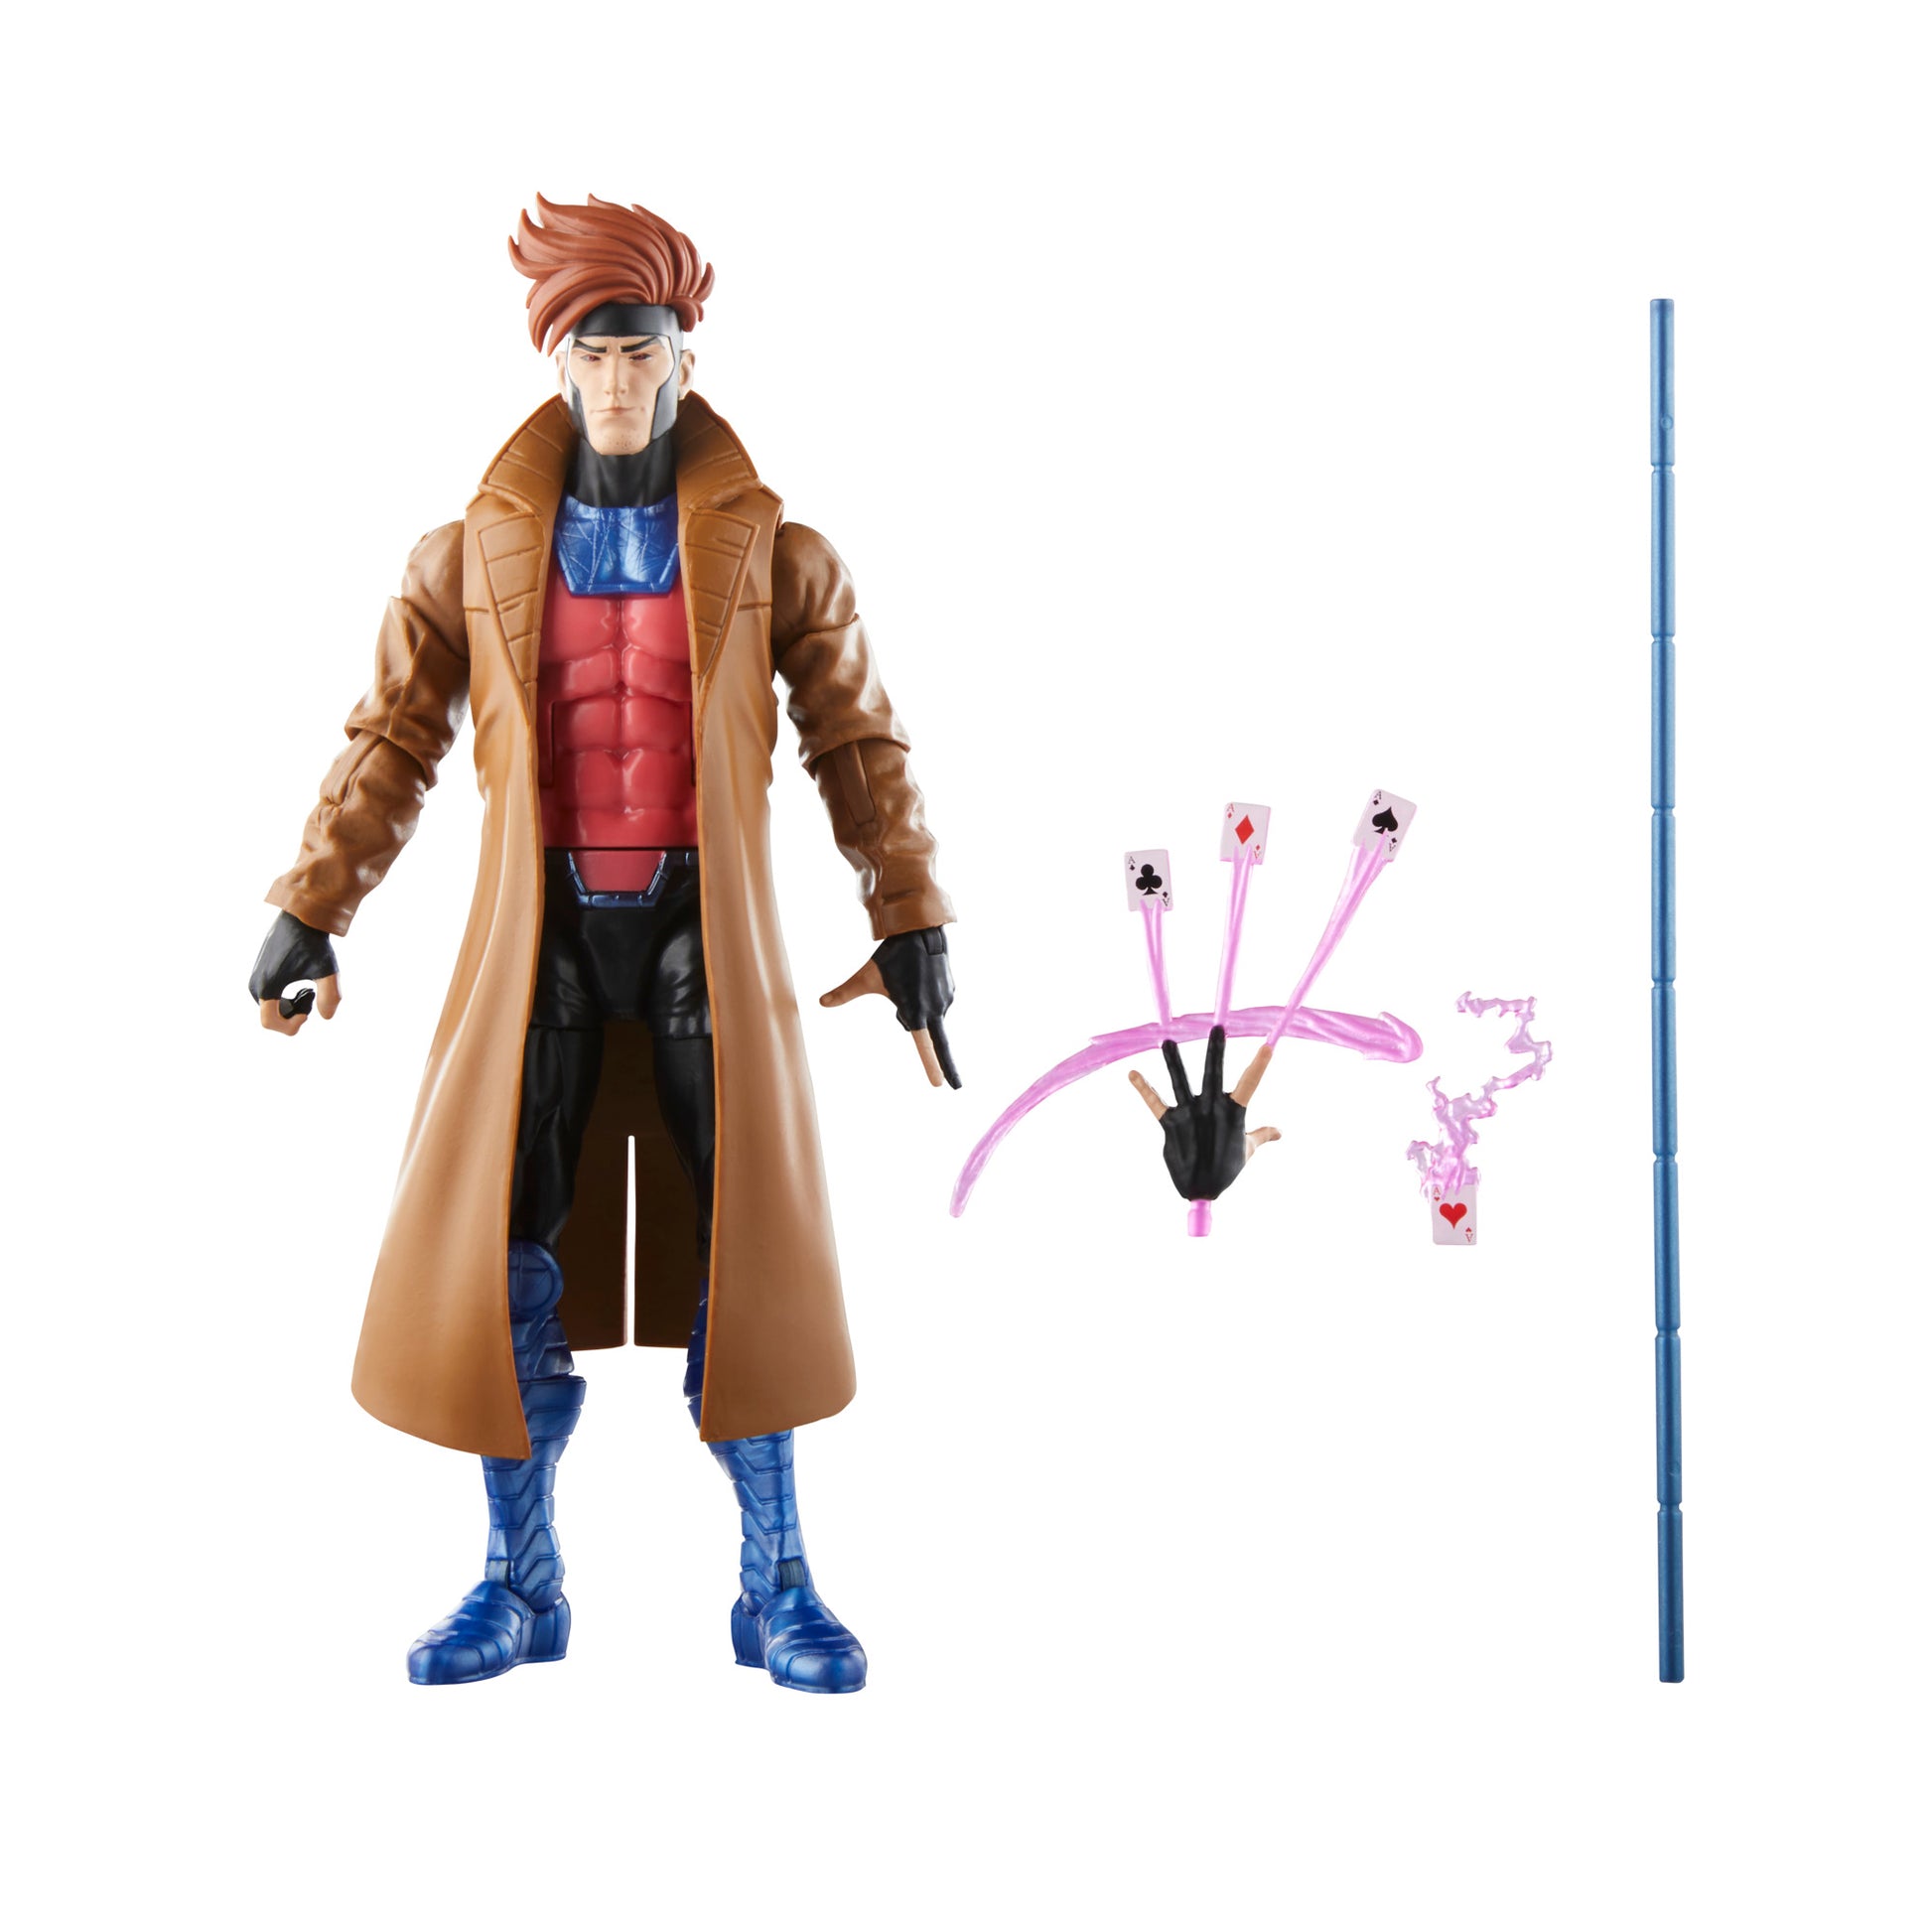 Hasbro Marvel Legends Series Gambit Action Figure Toy with Accessories - Heretoserveyou